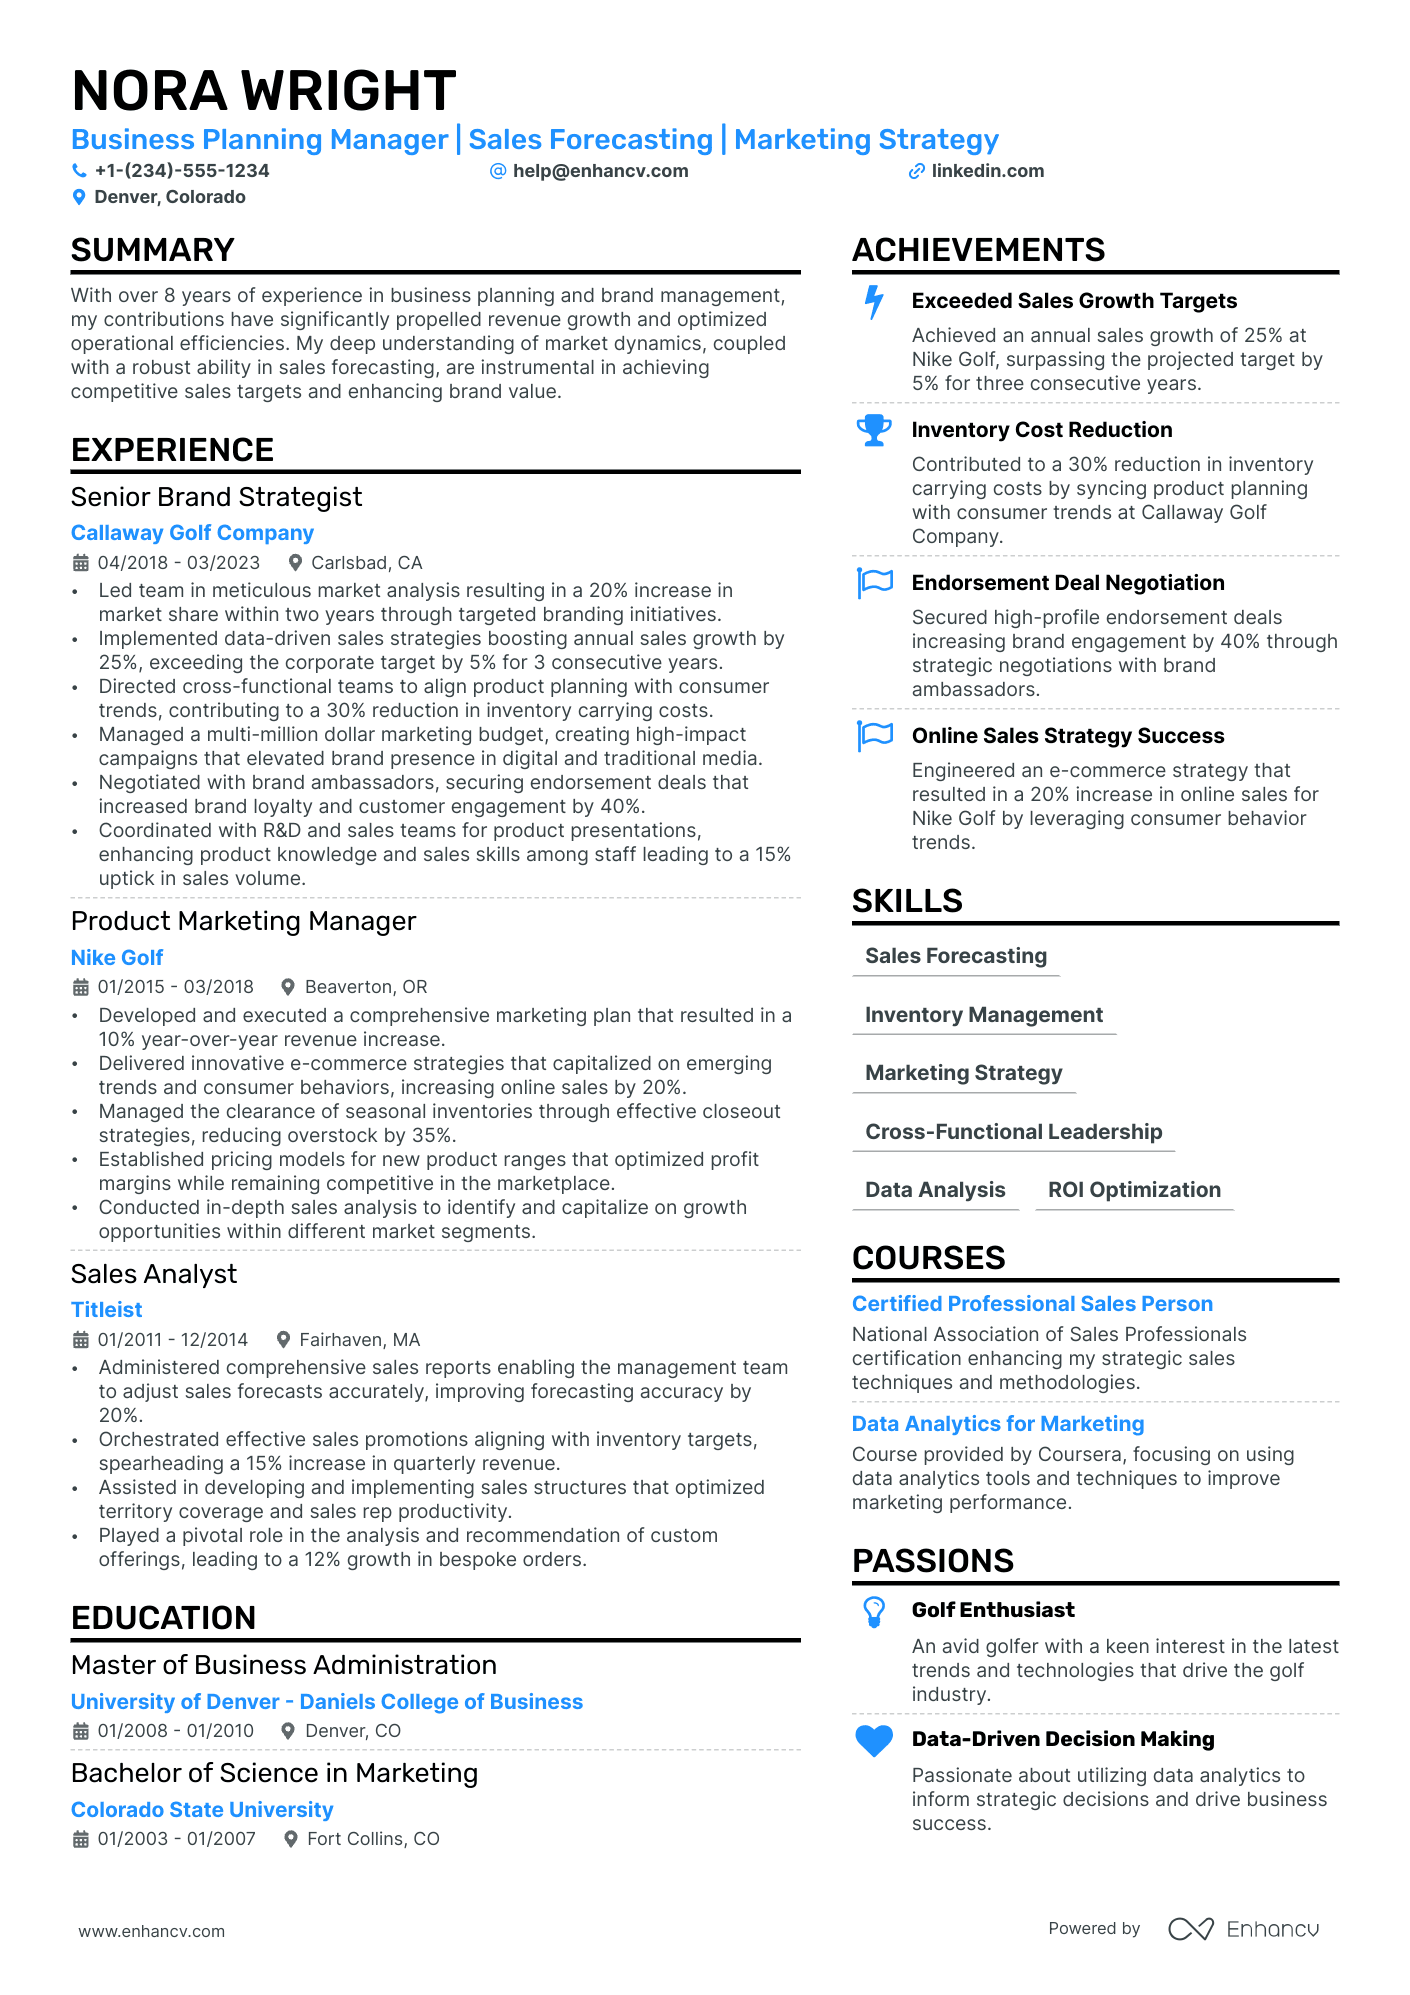 Business Planning Manager resume example